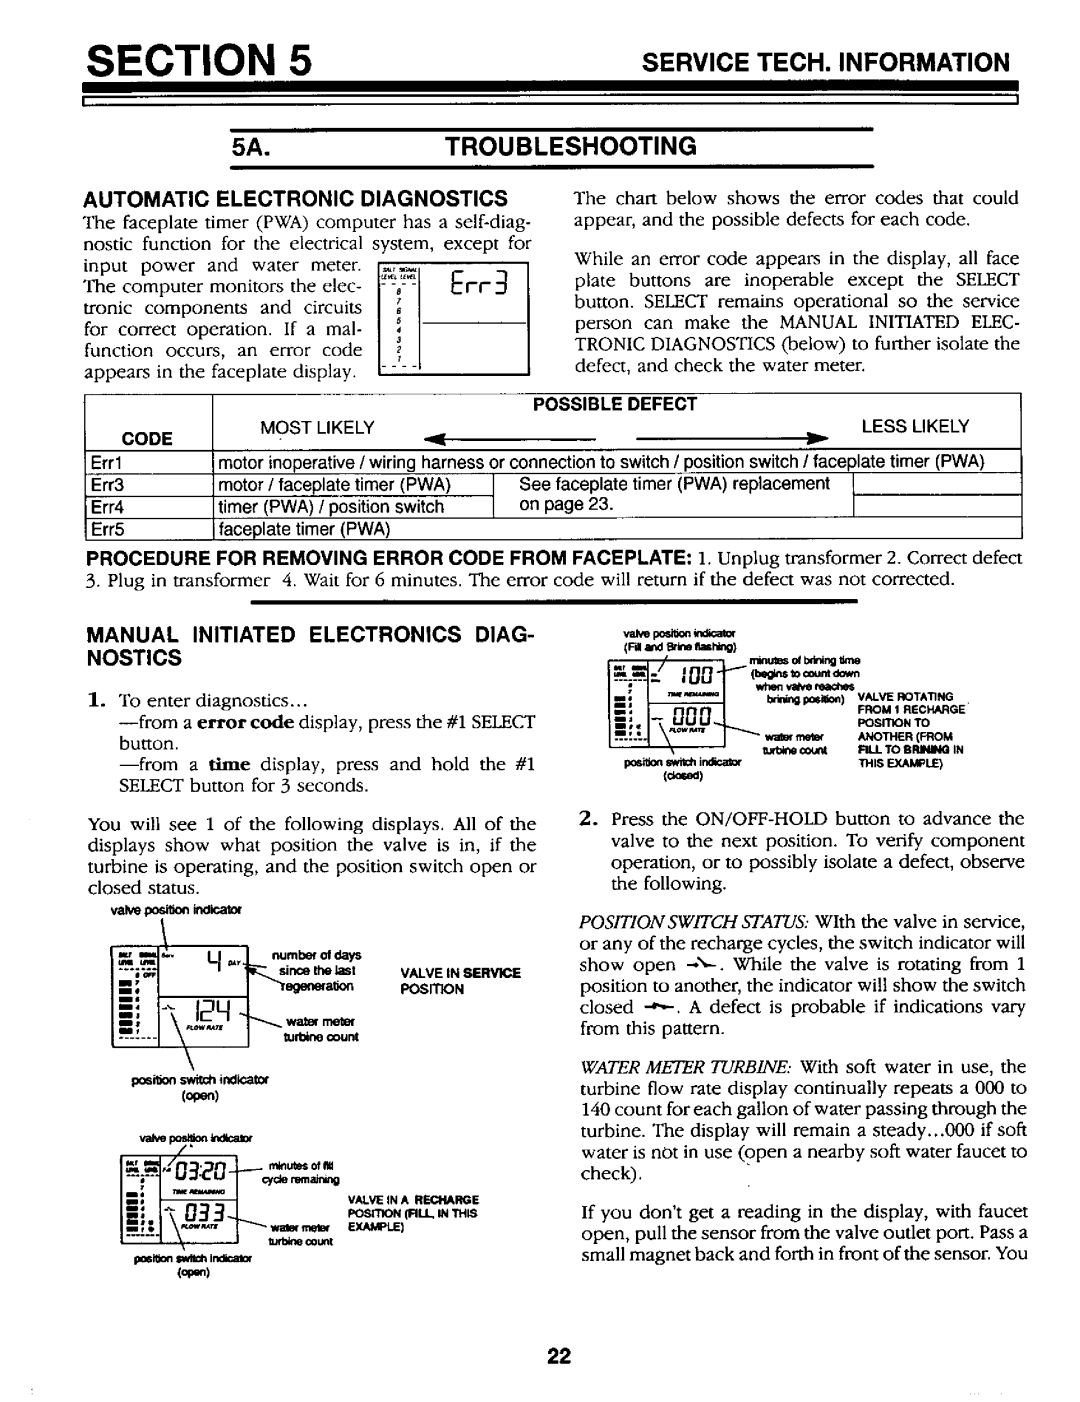 Kenmore 625.34867 owner manual Service Tech. Information, 5A.TROUBLESHOOTING, I.---- /t lJSt =, Section 